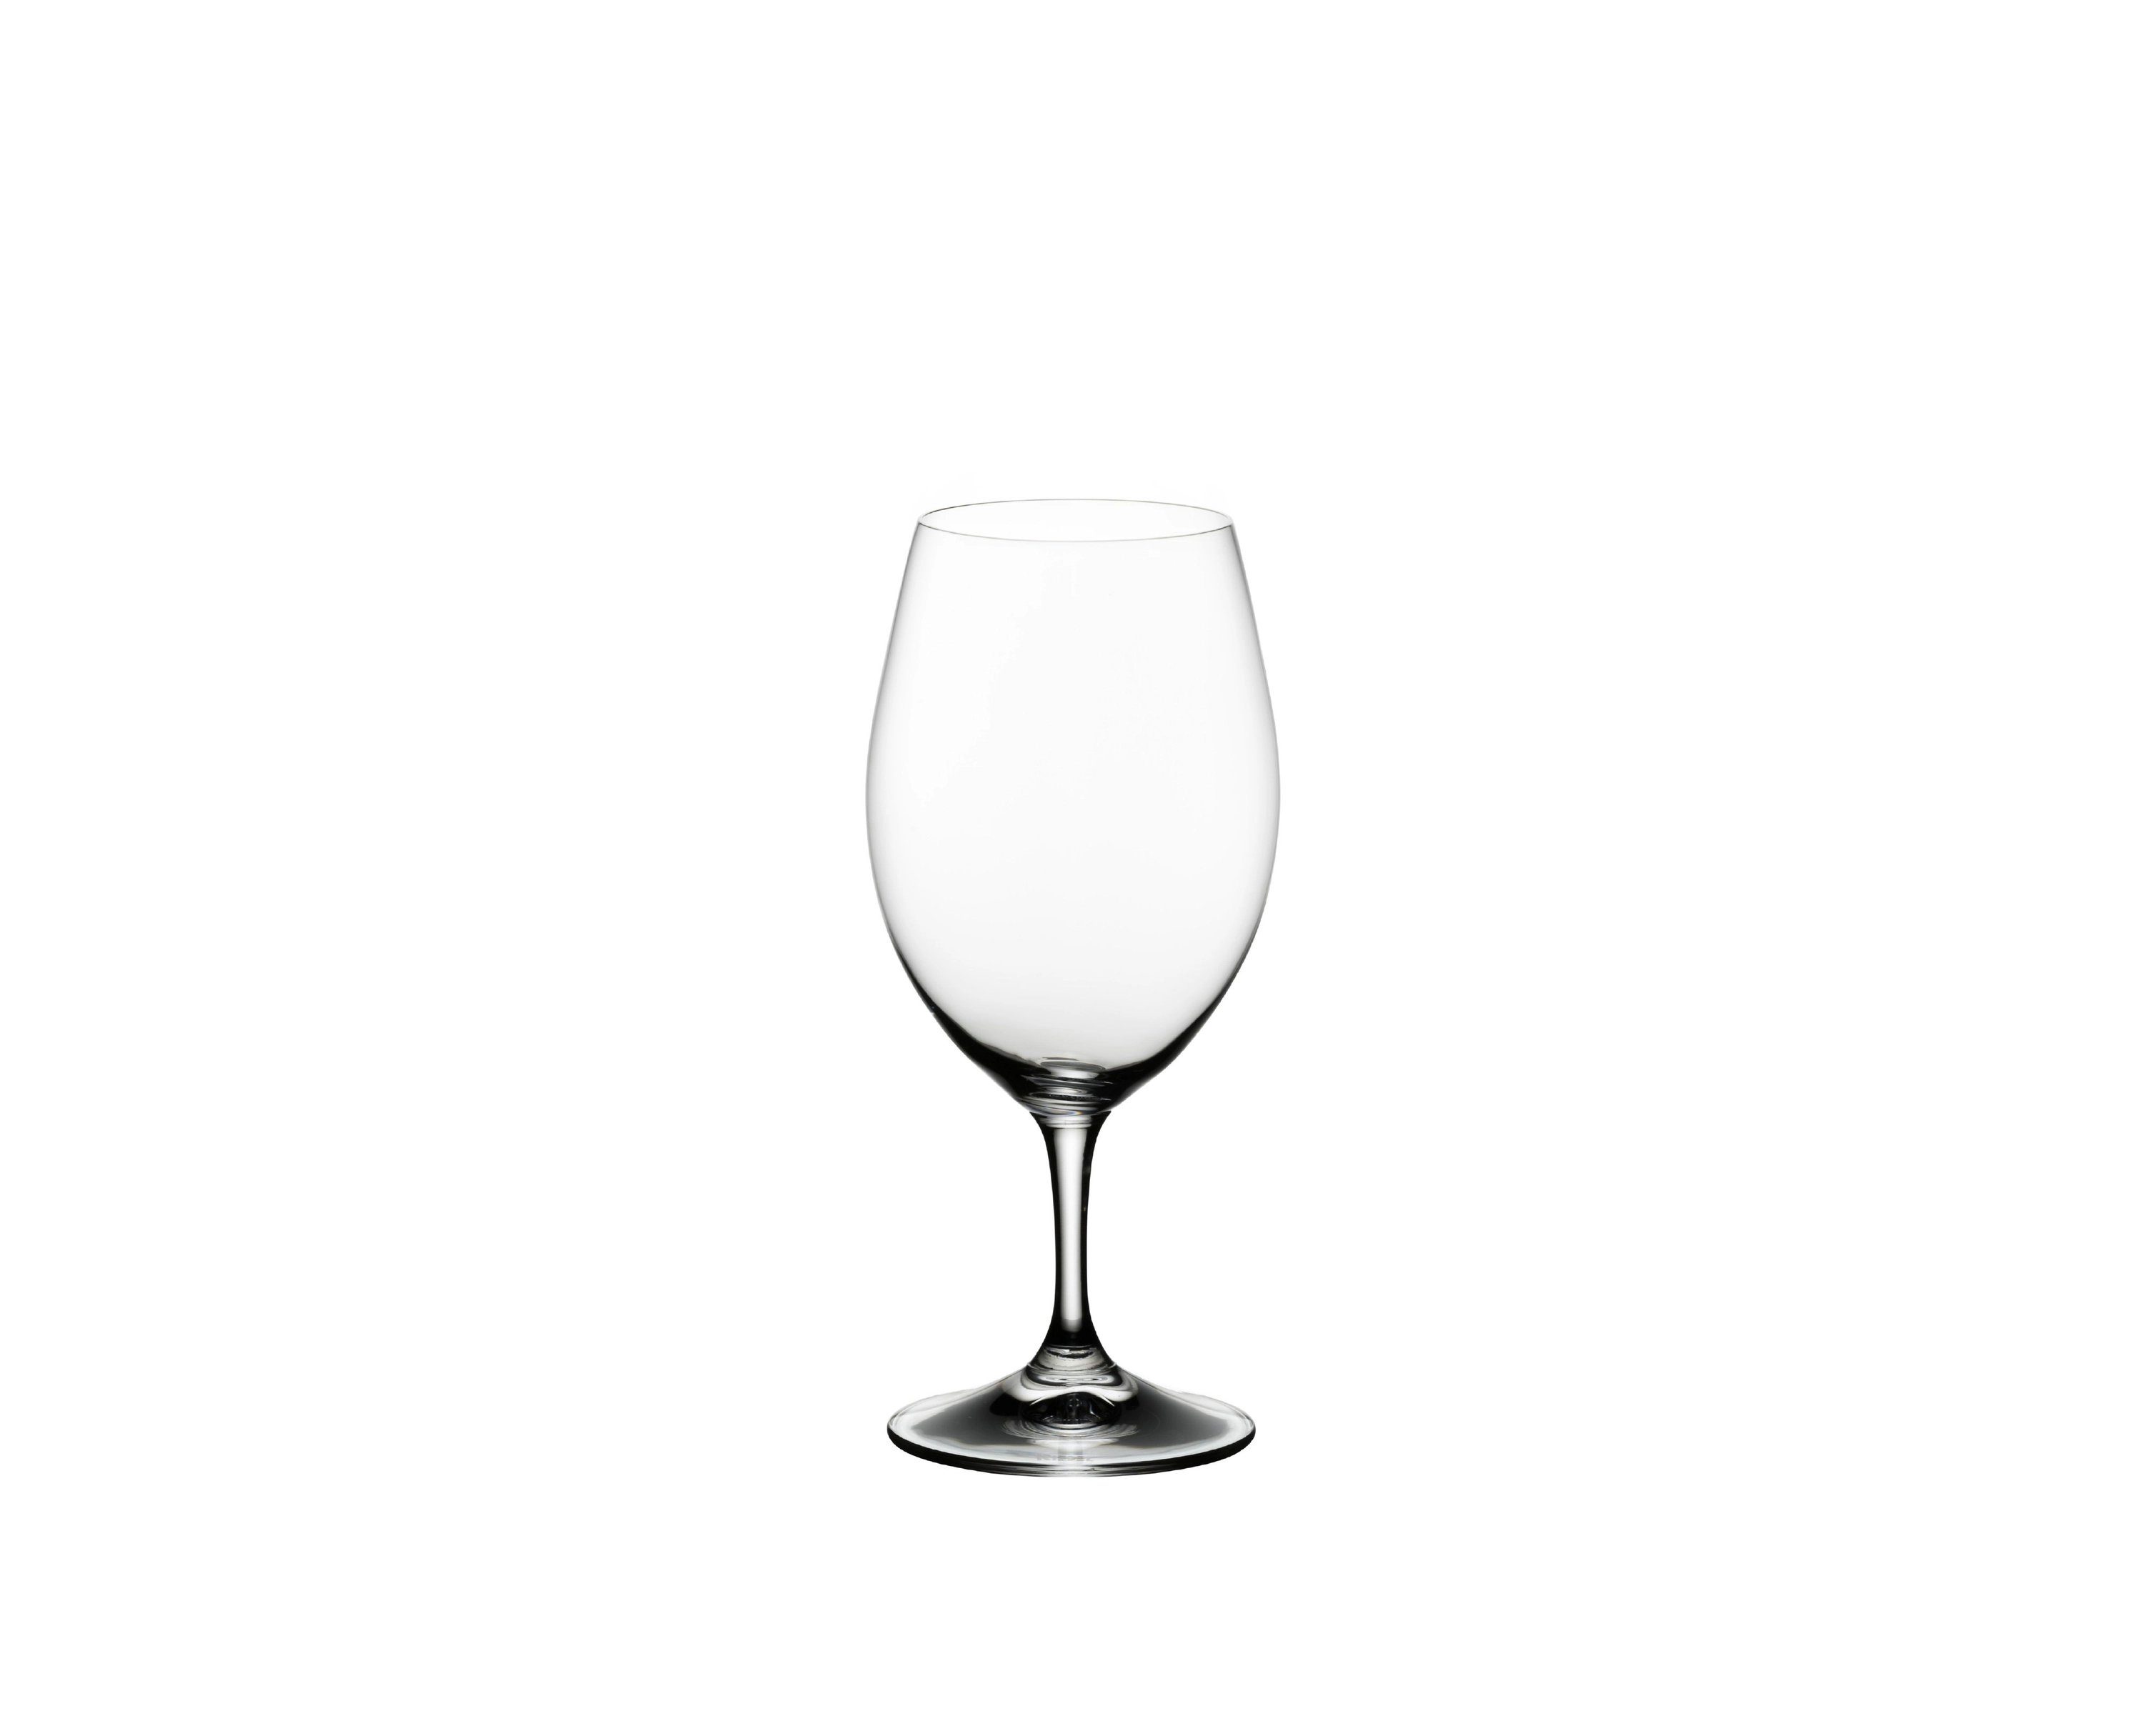 RIEDEL THE WINE GLASS COMPANY Weißweinglas Riedel Ouverture Magnum 2er-Set 6408/90, Glas